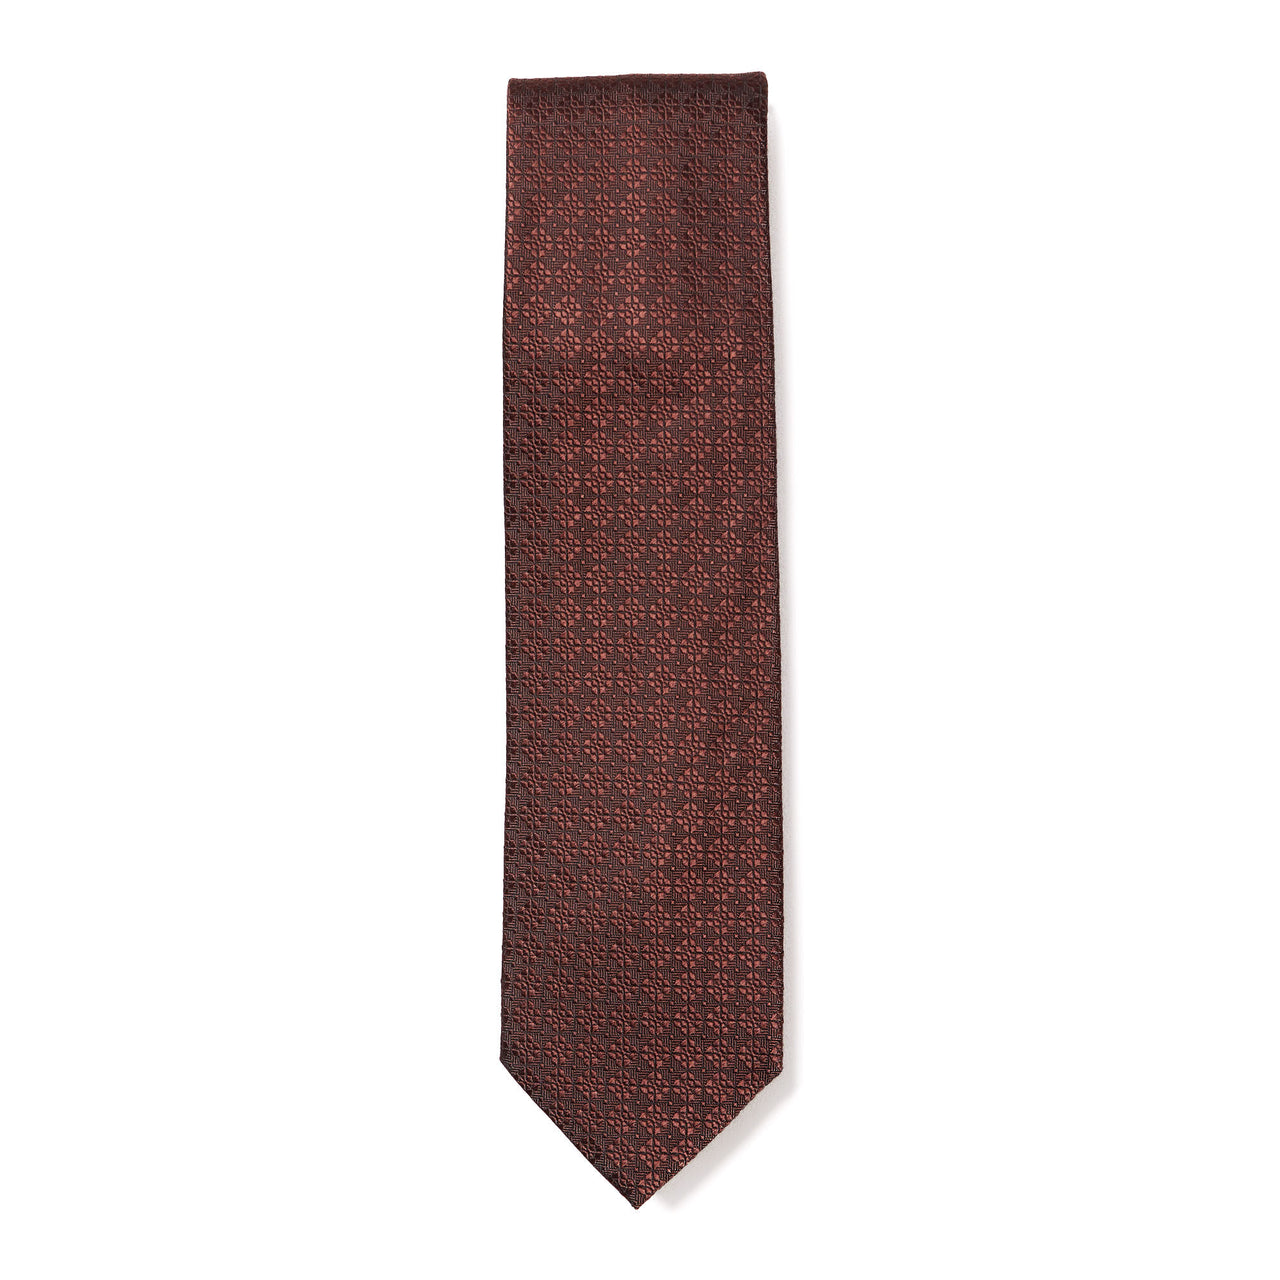 HENRY SARTORIAL X CANTINI Woven Textured Tie BROWN